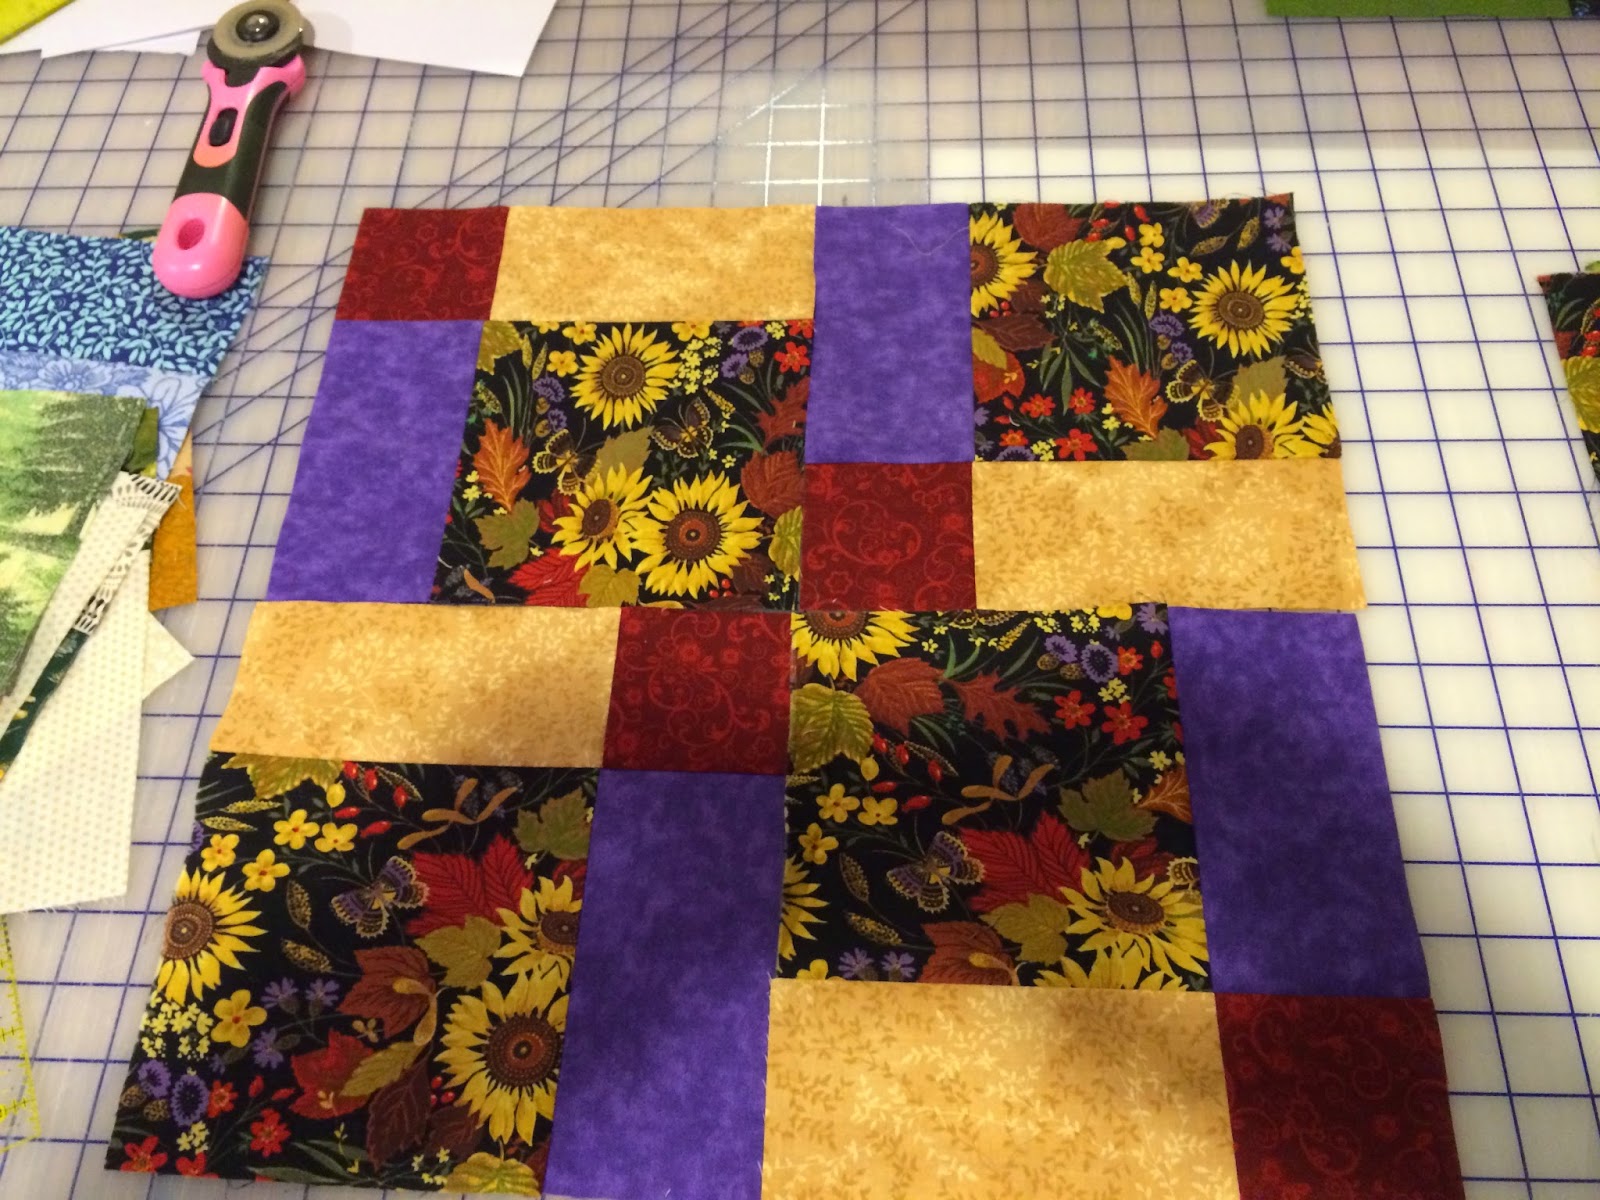 ART ALONG THE WAY: Disappearing nine patch quilt 2015